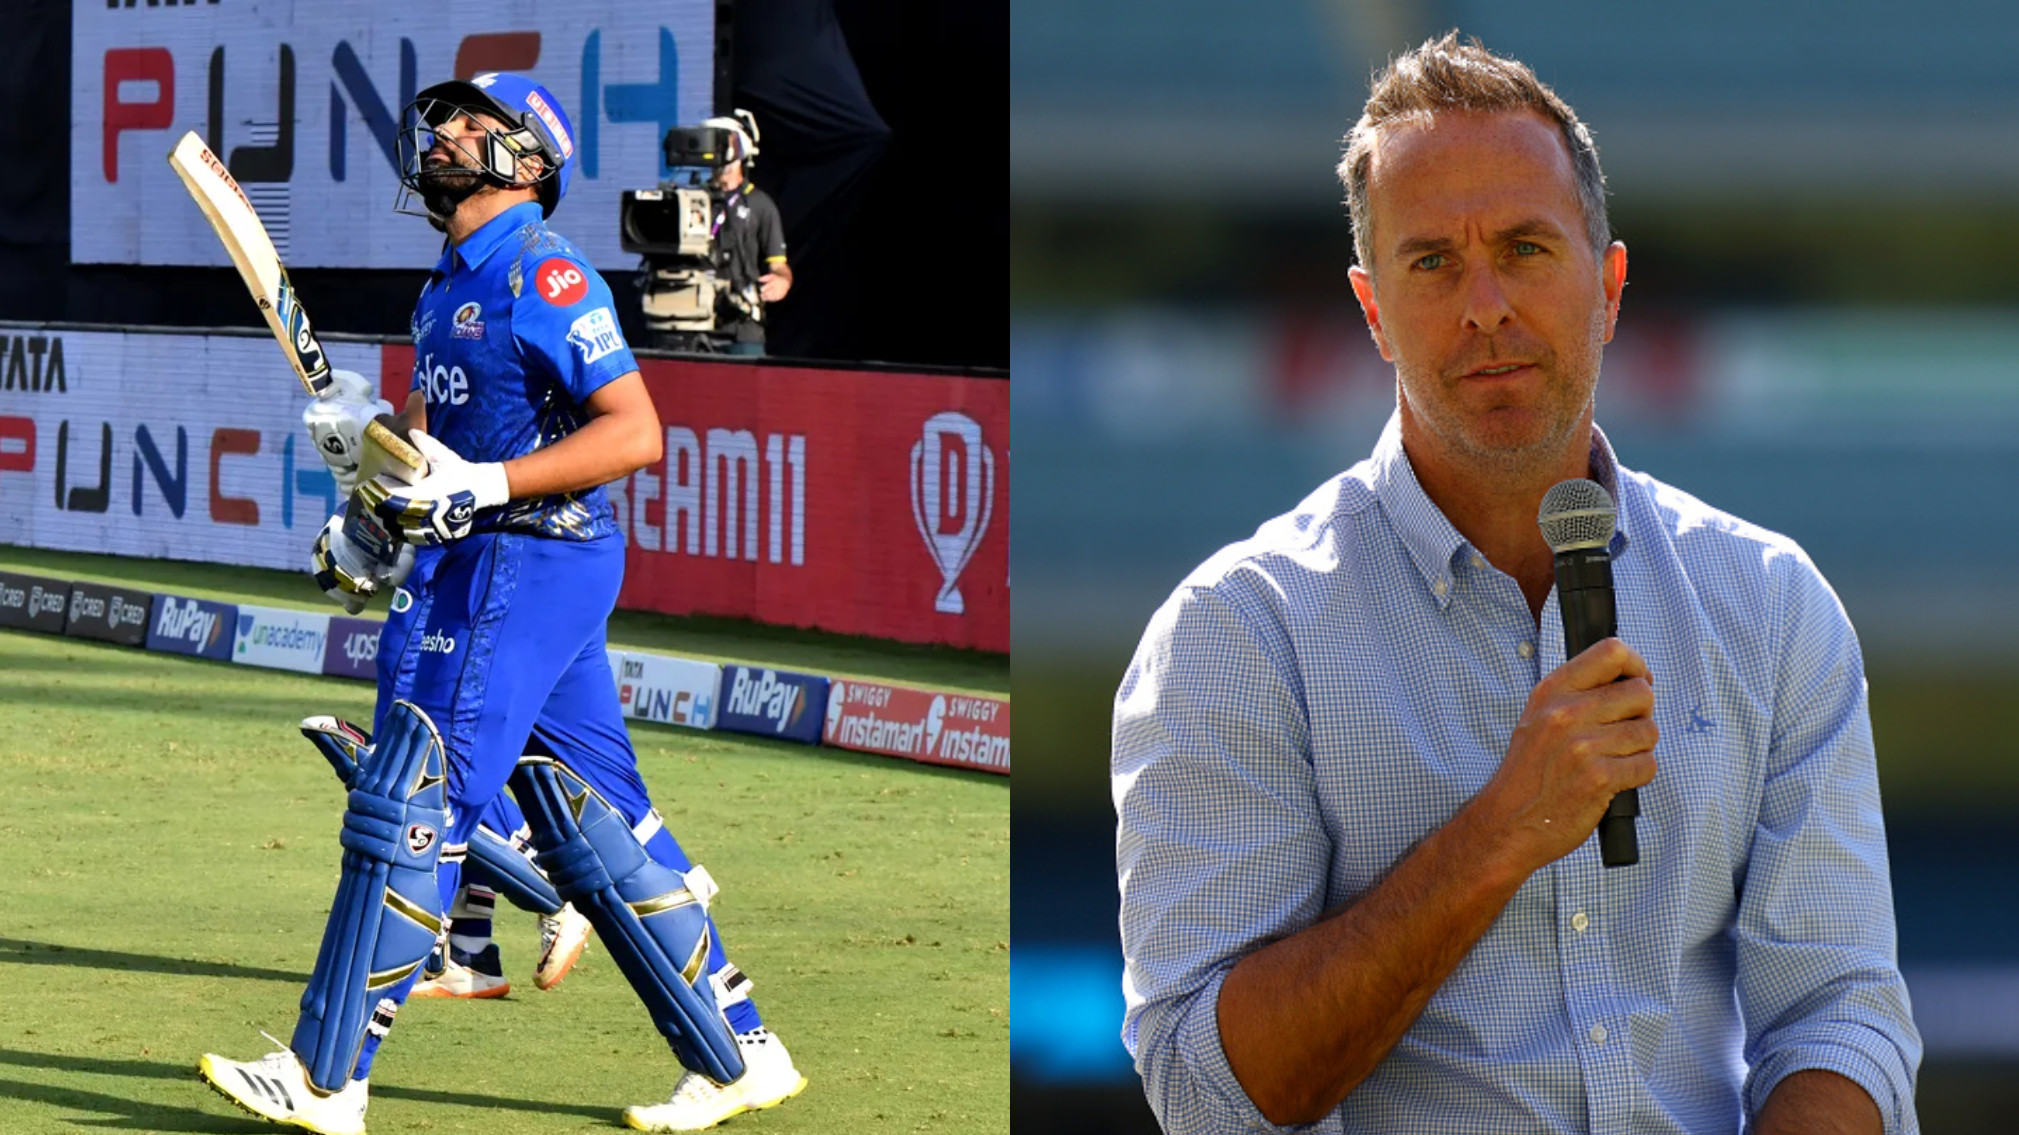 IPL 2022: “Time for Rohit to take a breather”- Michael Vaughan wants MI to give youngsters a chance